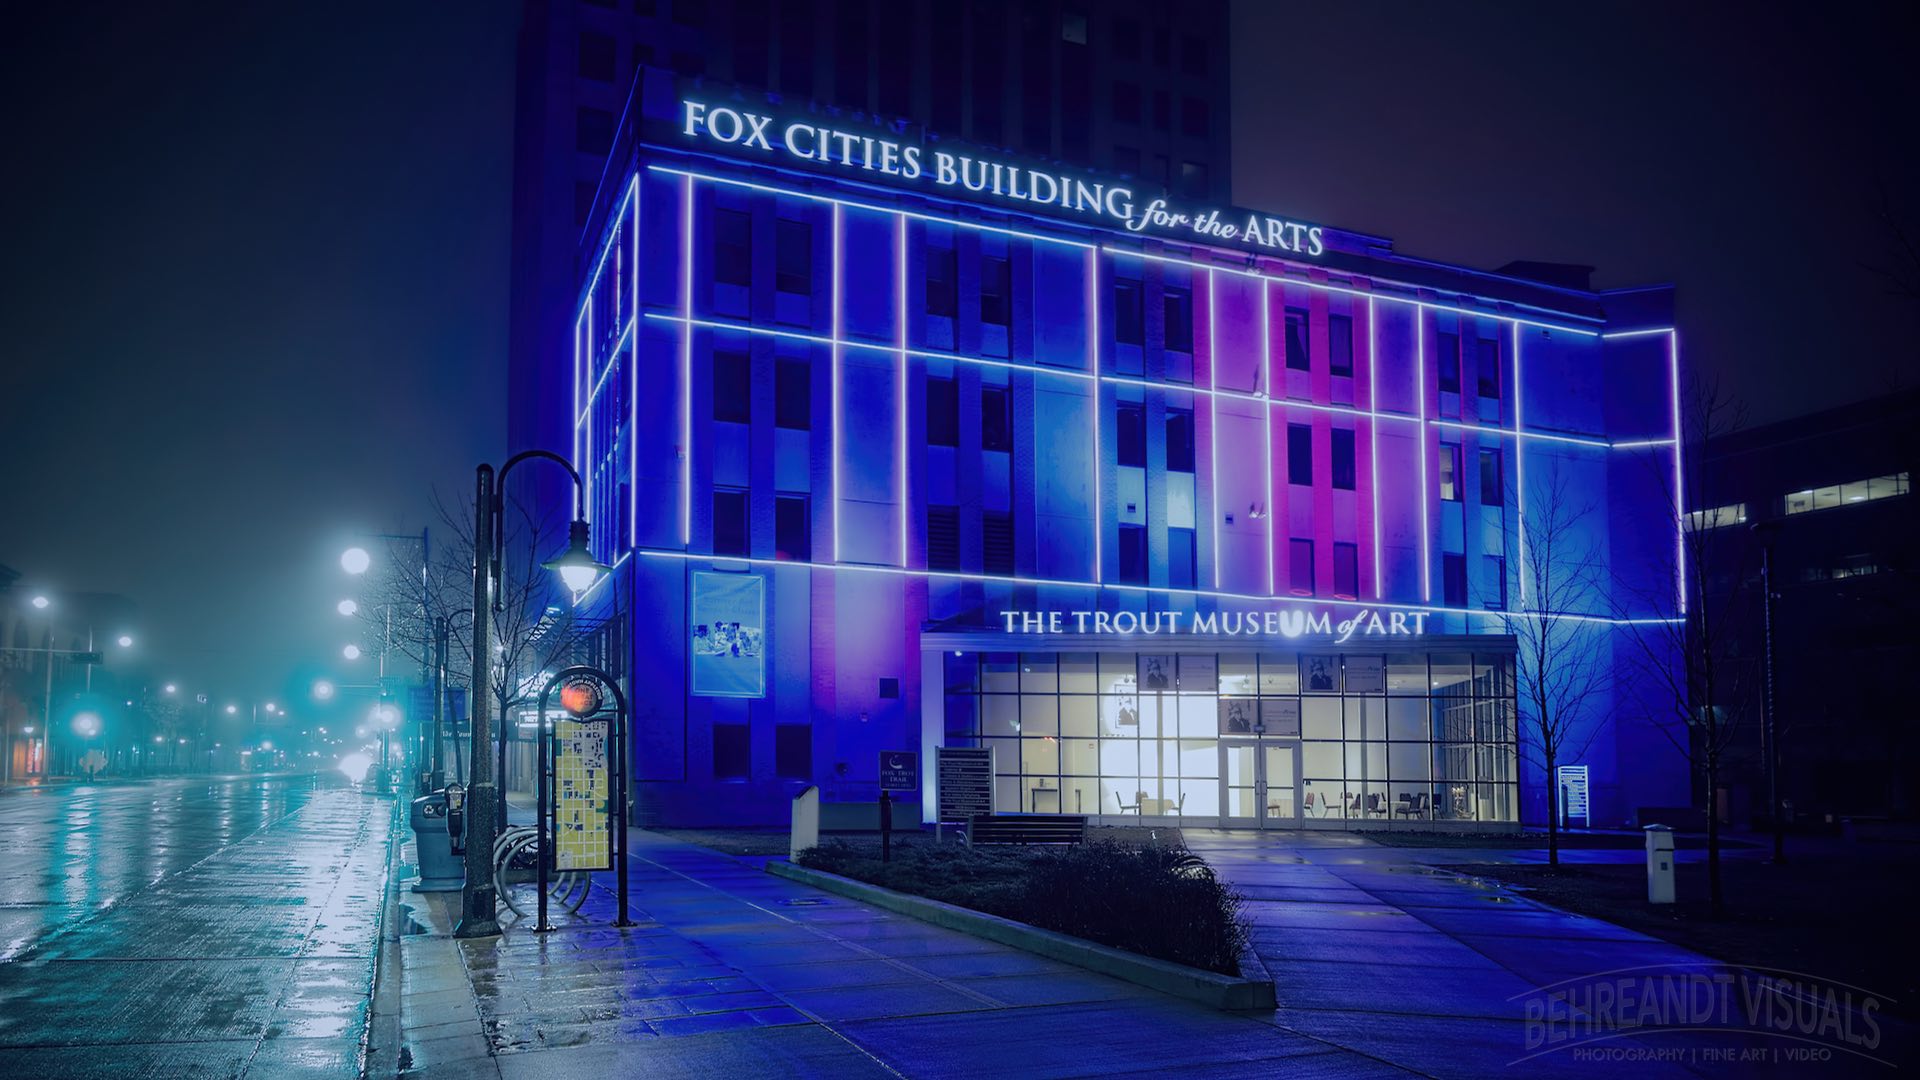 The Fox Cities Building for the Arts, home of the Trout Museum in Appleton, Wisconsin.